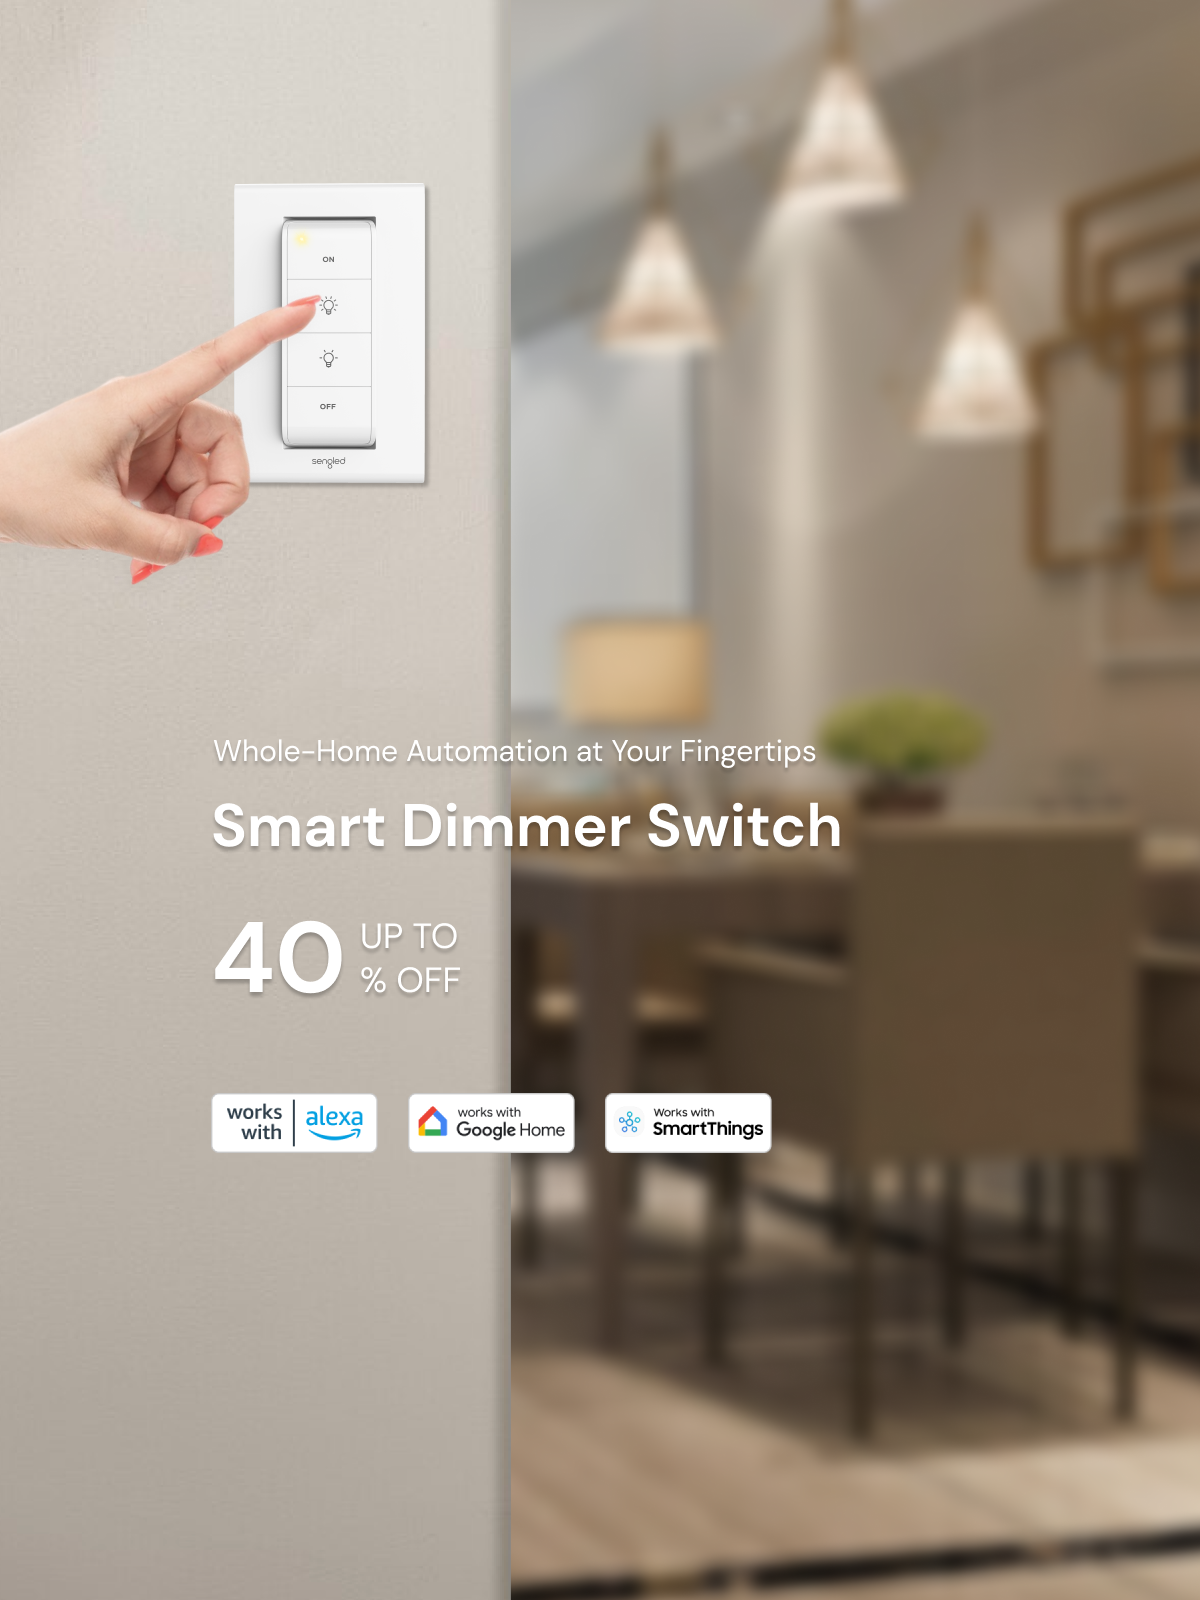 Sengled Smart Dimmer Switch: Seamless Lighting Control. Keywords: Sengled, smart bulbs, light switches, home automation, dimmer, remote control, lighting scenes, voice control, alexa light bulbs, alexa light switch.